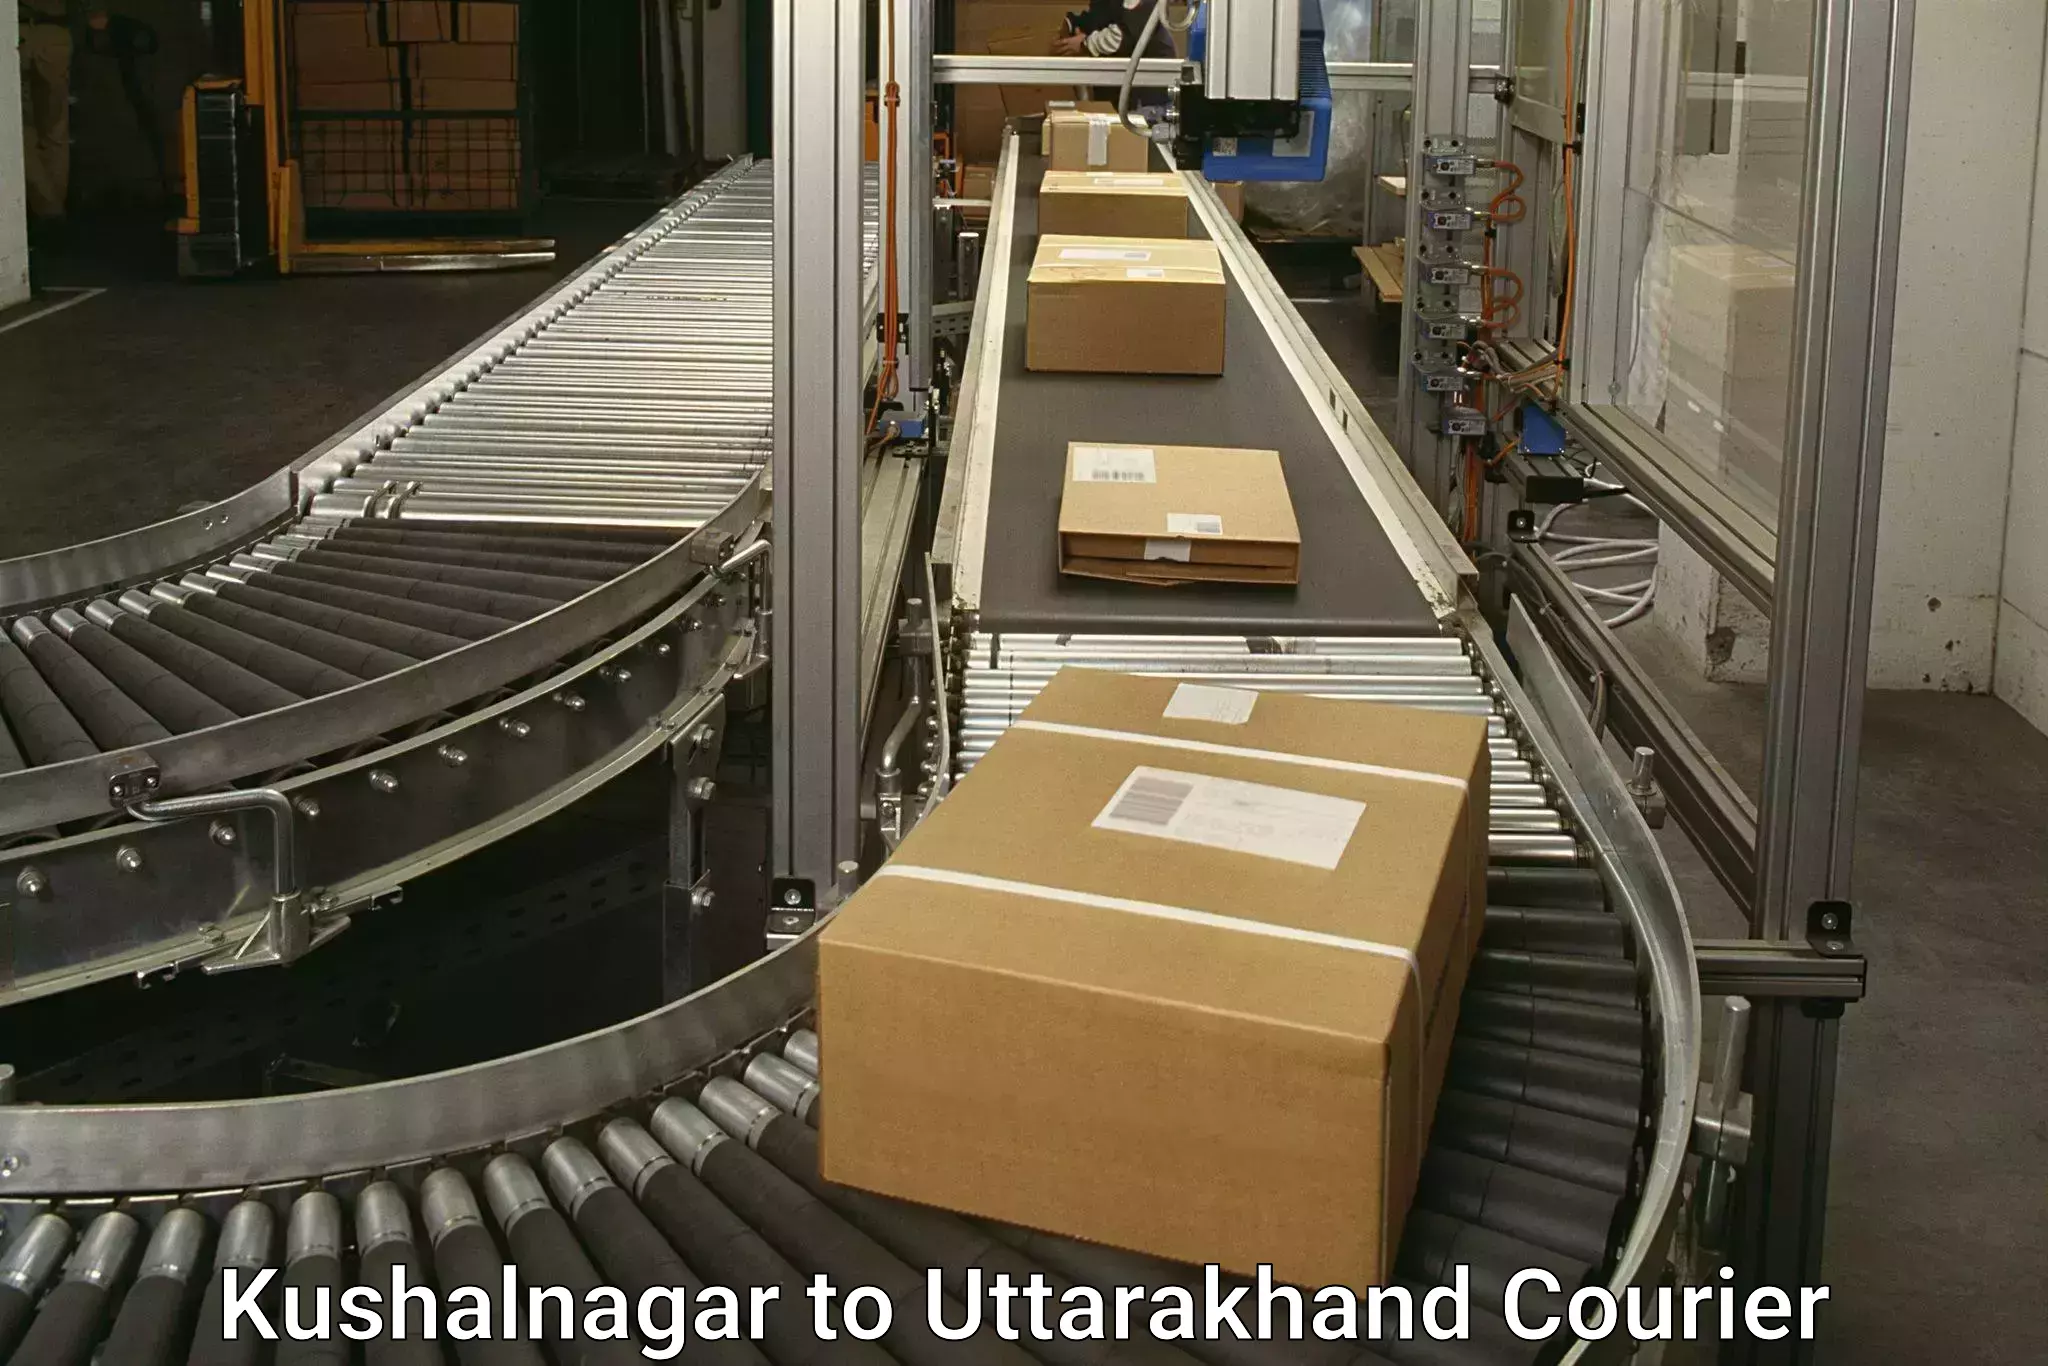 State-of-the-art courier technology Kushalnagar to Rudrapur